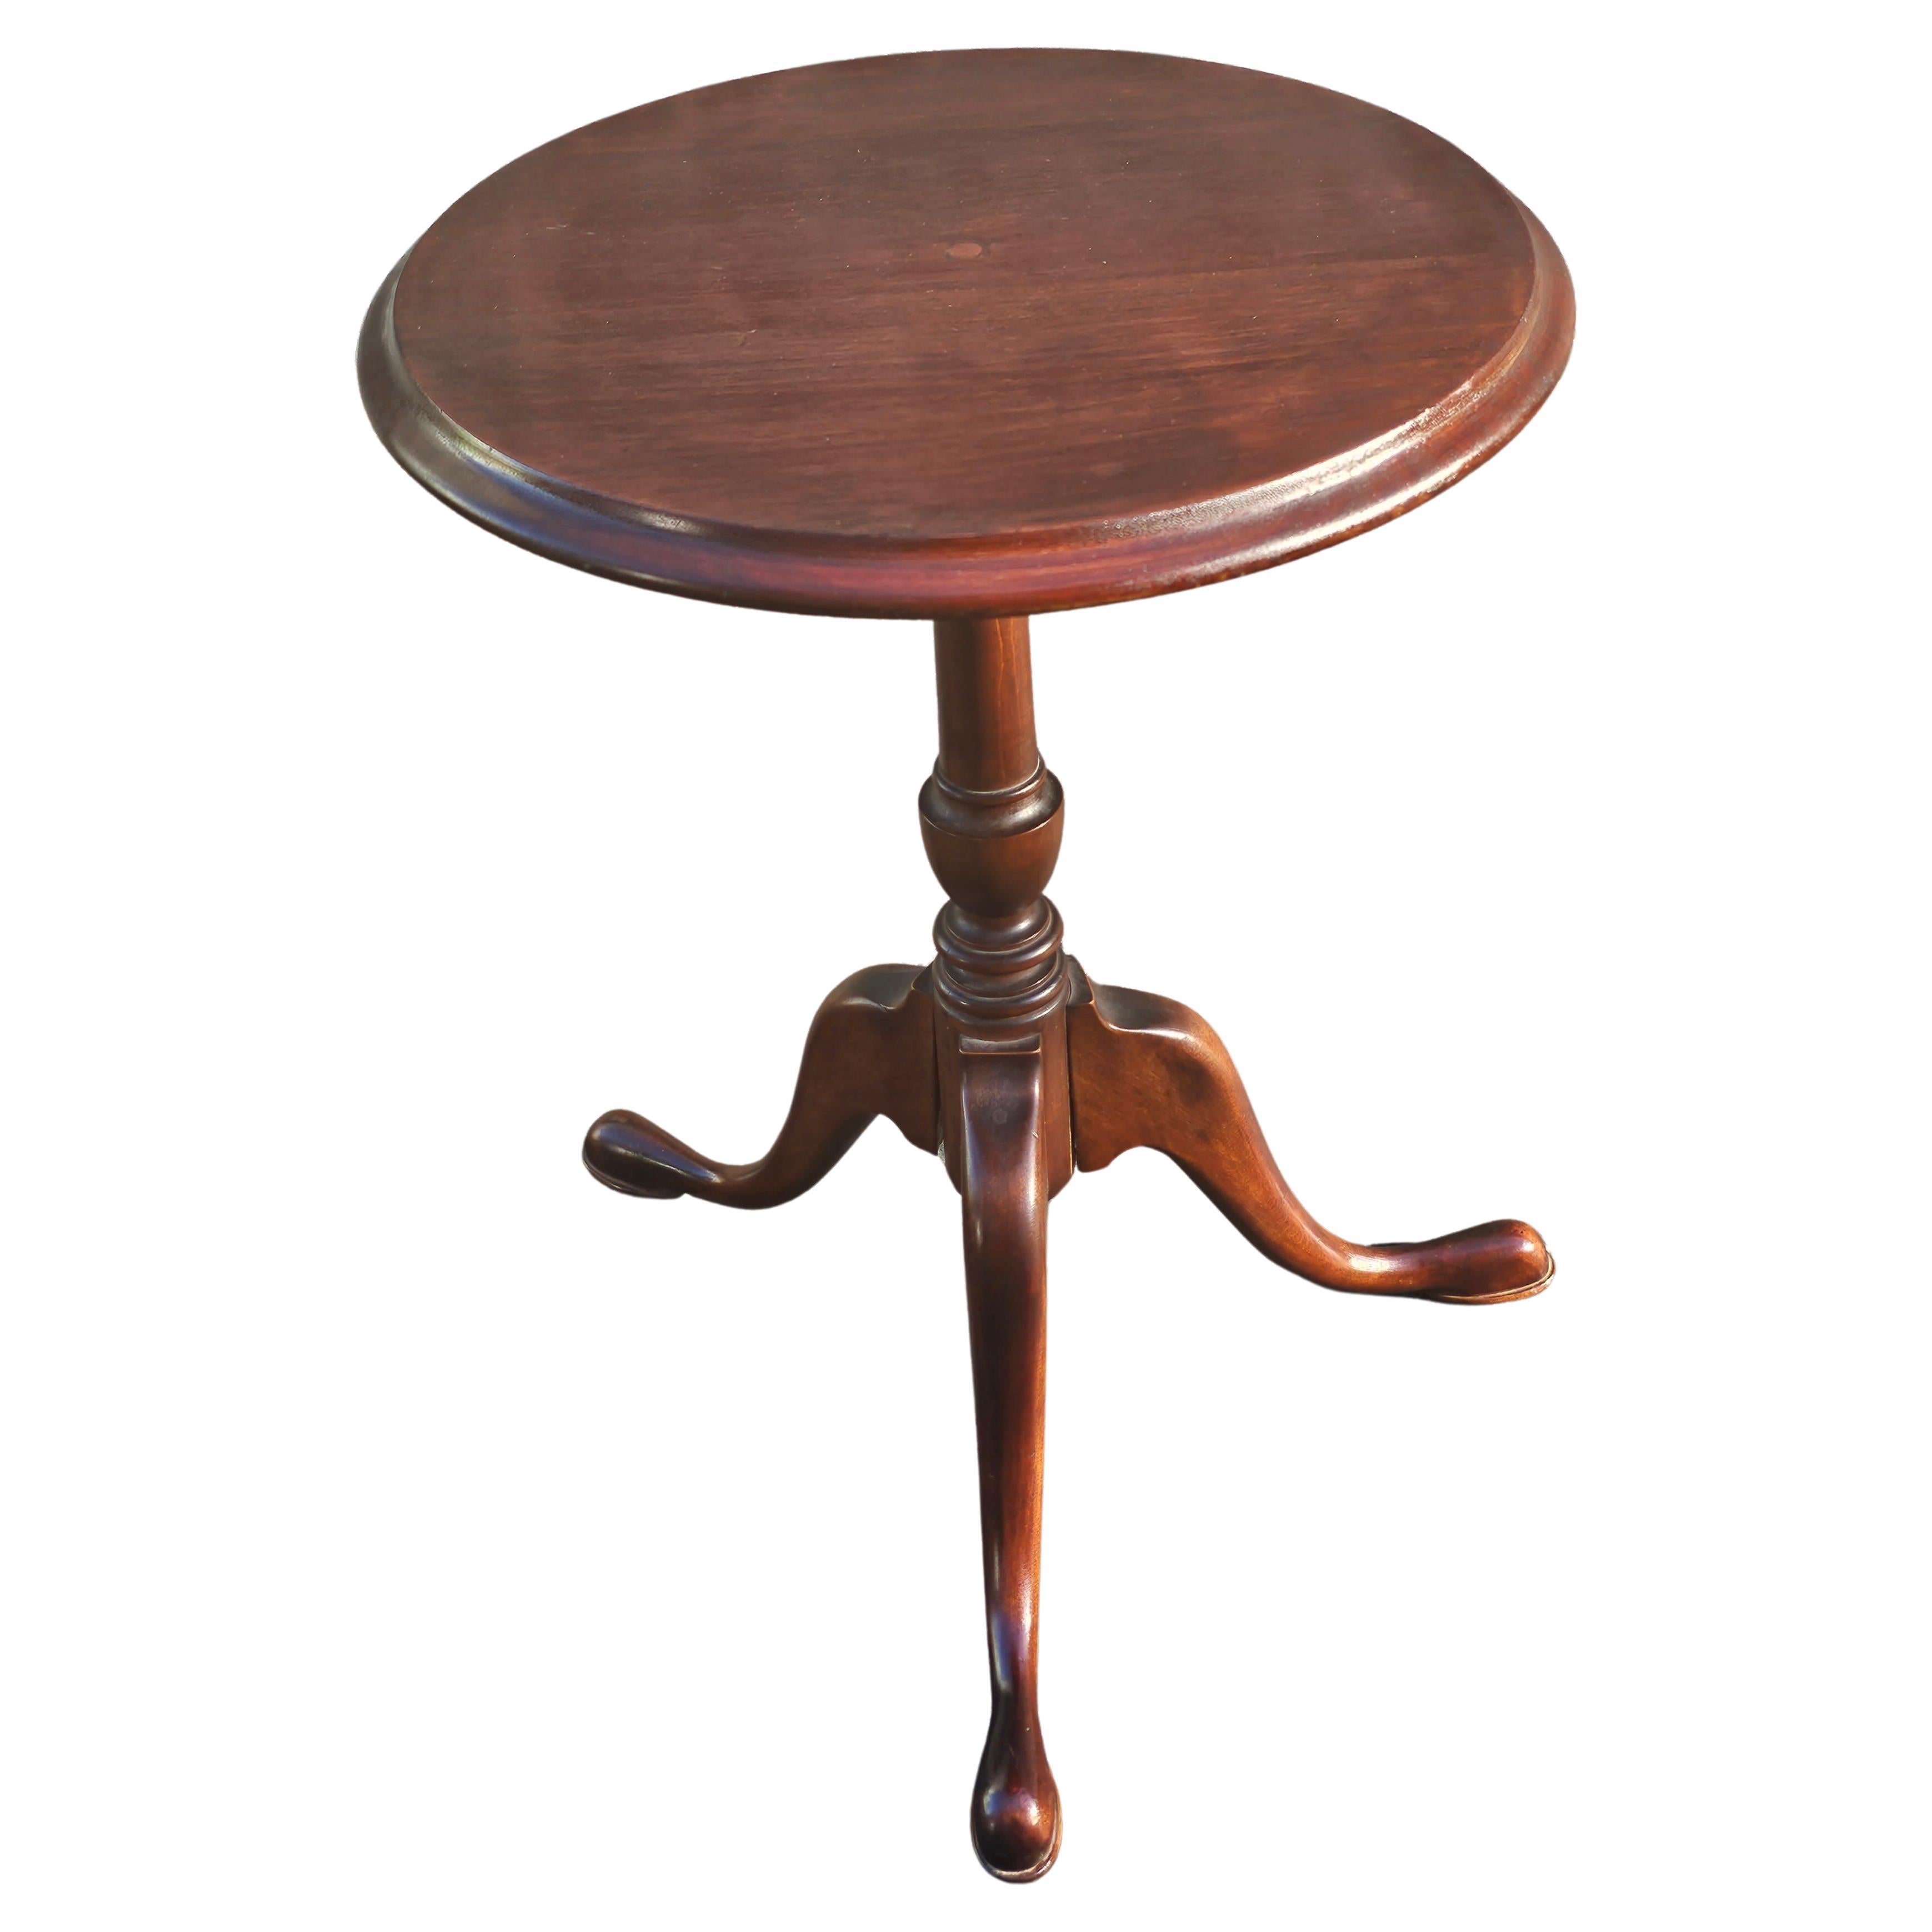 Early 20th Century Solid Cherry Pedestal Tripod Candle Stand with Snake Feet For Sale